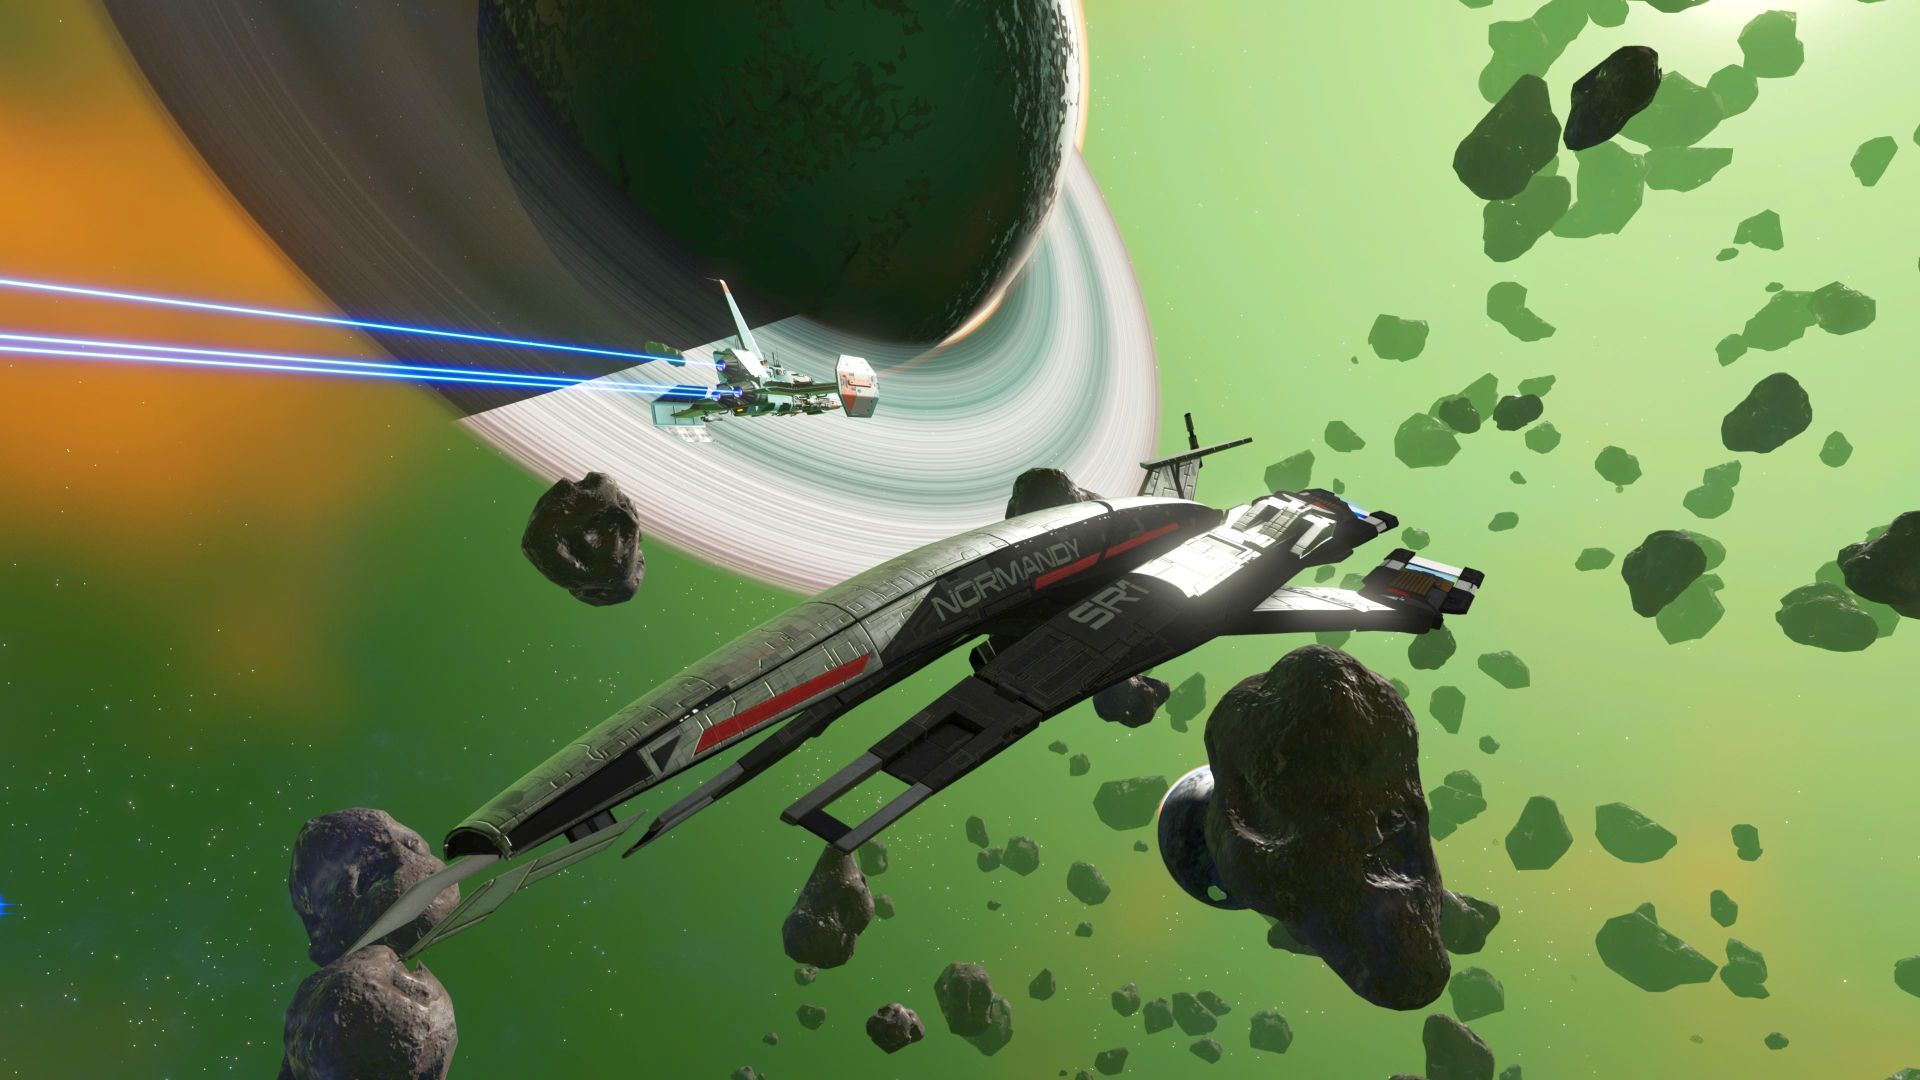 Mass Effect’s Normandy SR1 and past Expeditions return to No Man’s Sky for a limited time